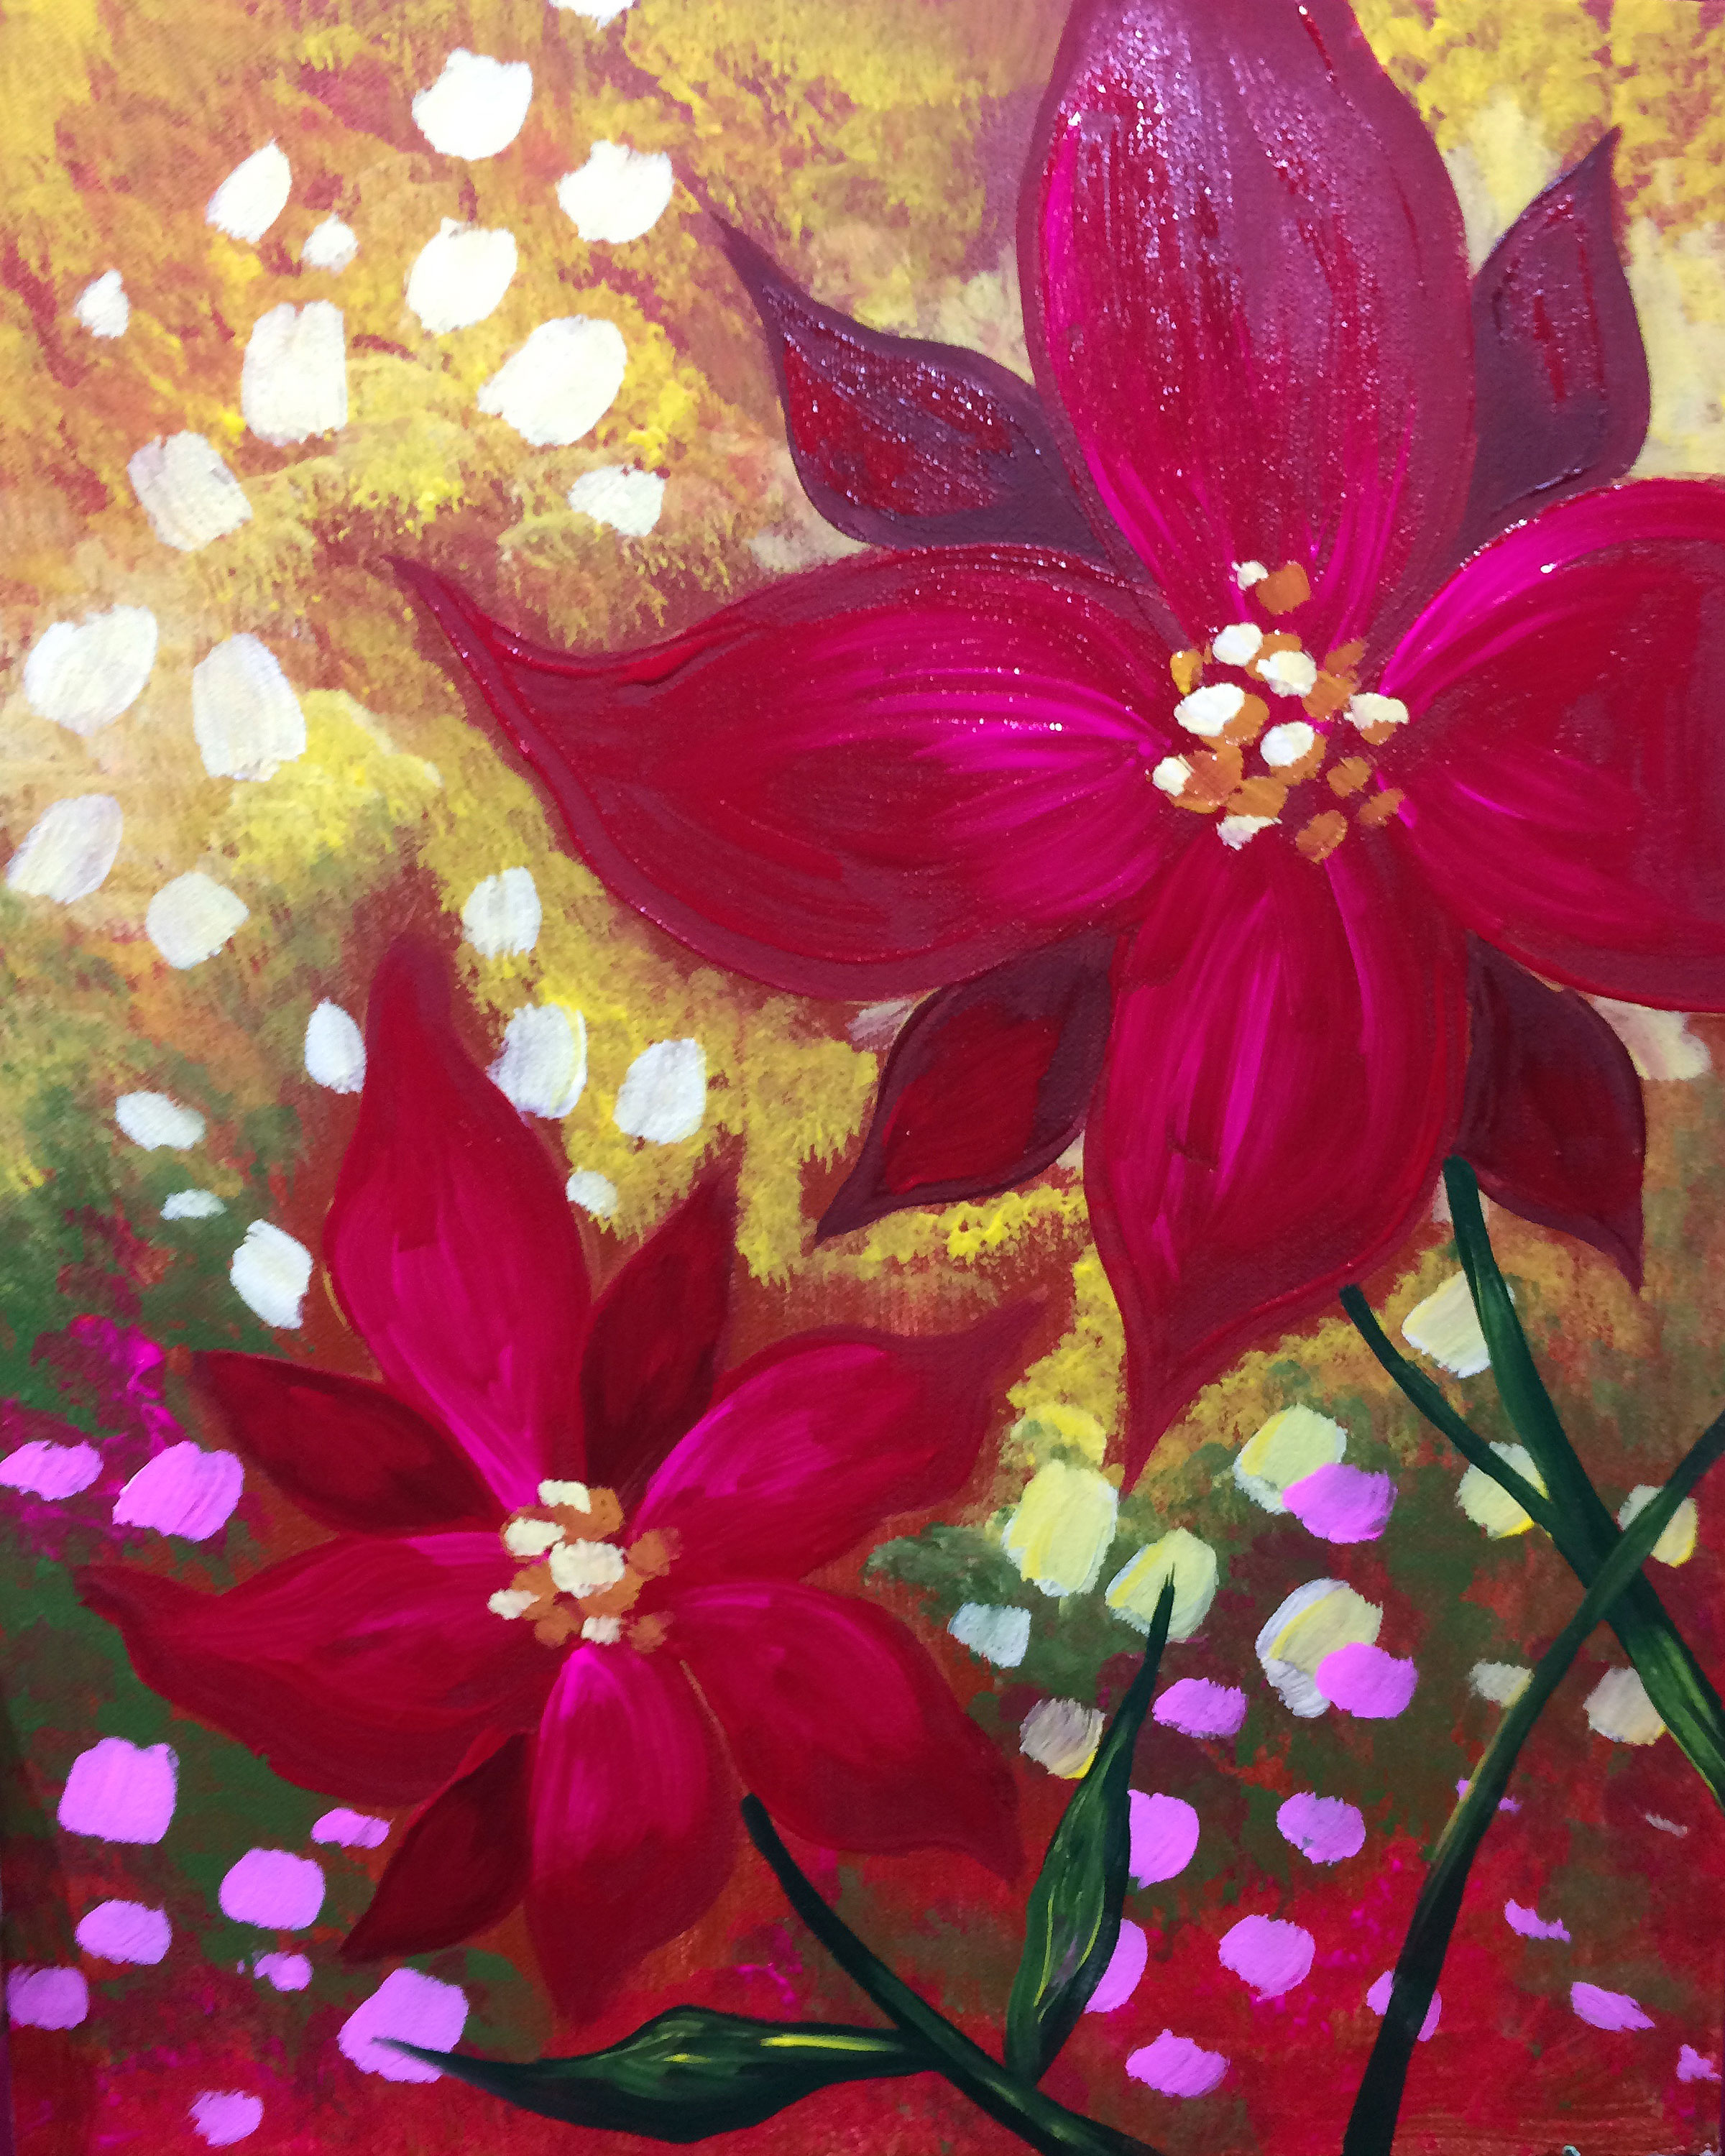 Painting, Pinot's Palette, Paint and Sip, Girls Night Out, Christmas Art, Snowman, Poinsettia